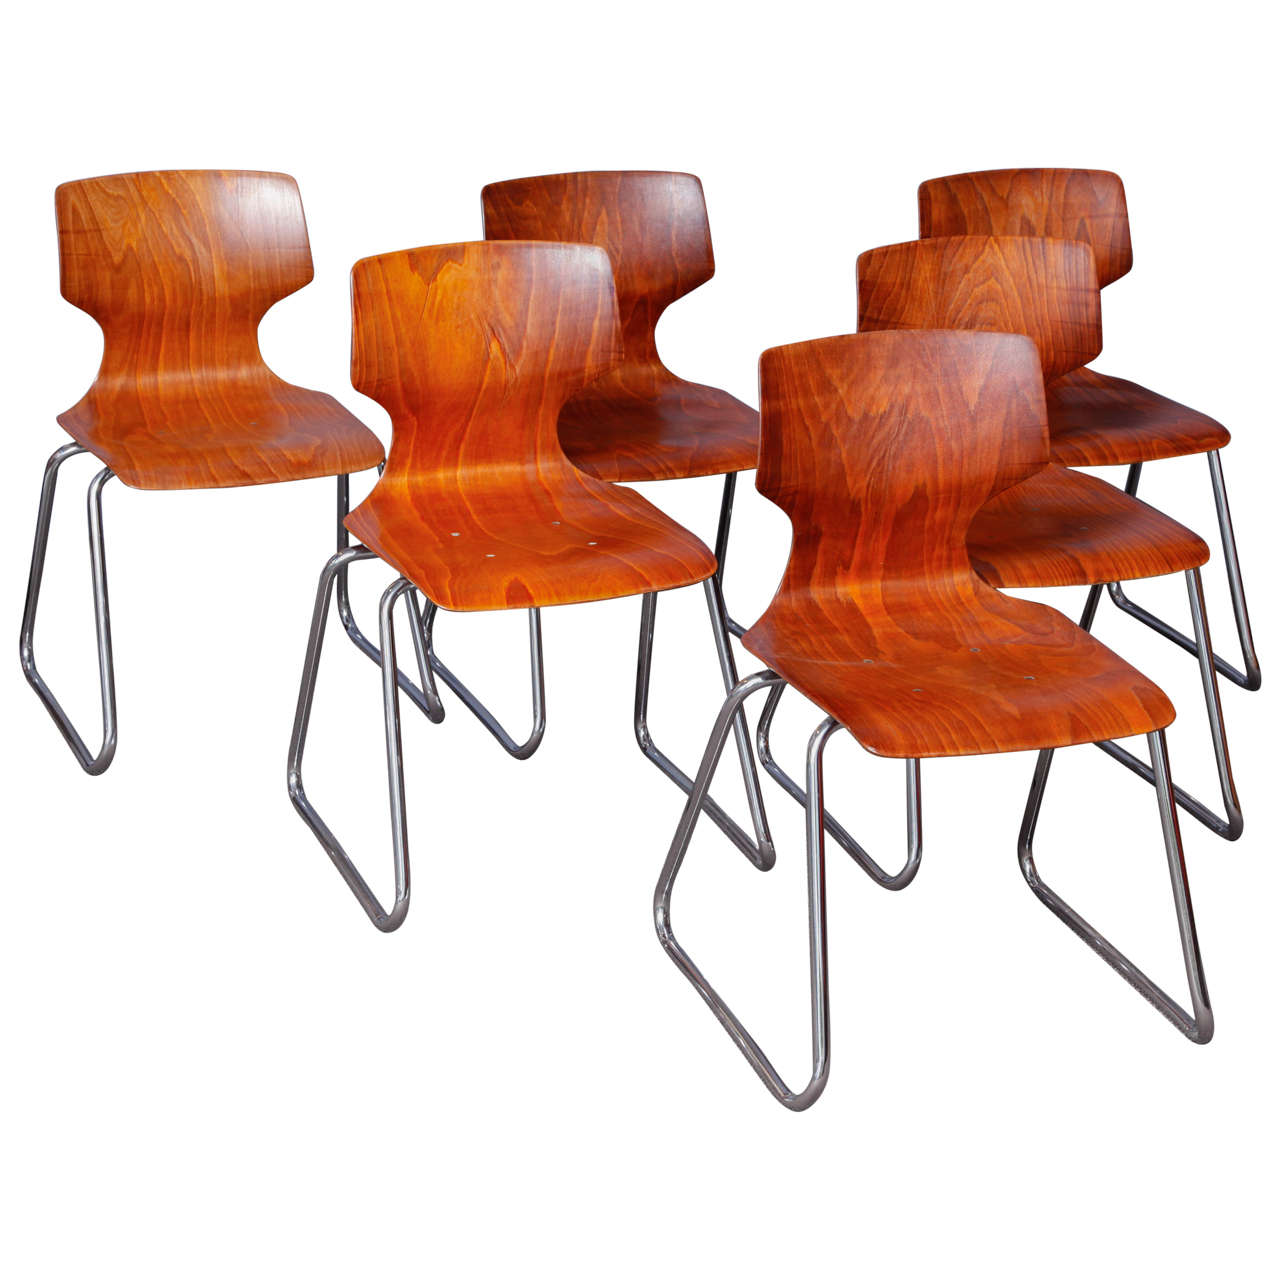 Set of Six Chairs Design by Adam Stegner for Flototto